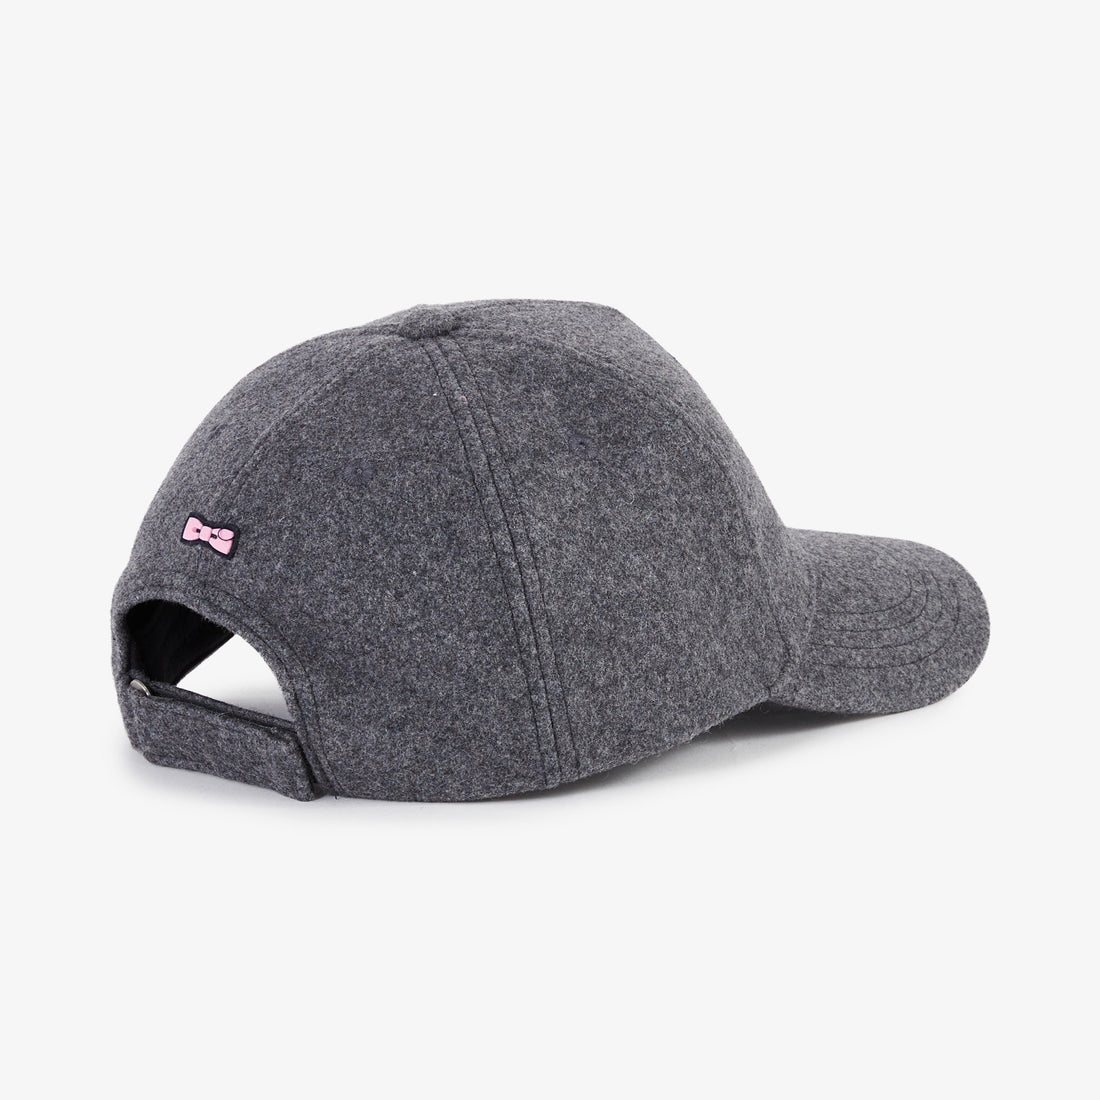 Grey Embroidered Cap With Patch_H23CHACA0009_GRM_02